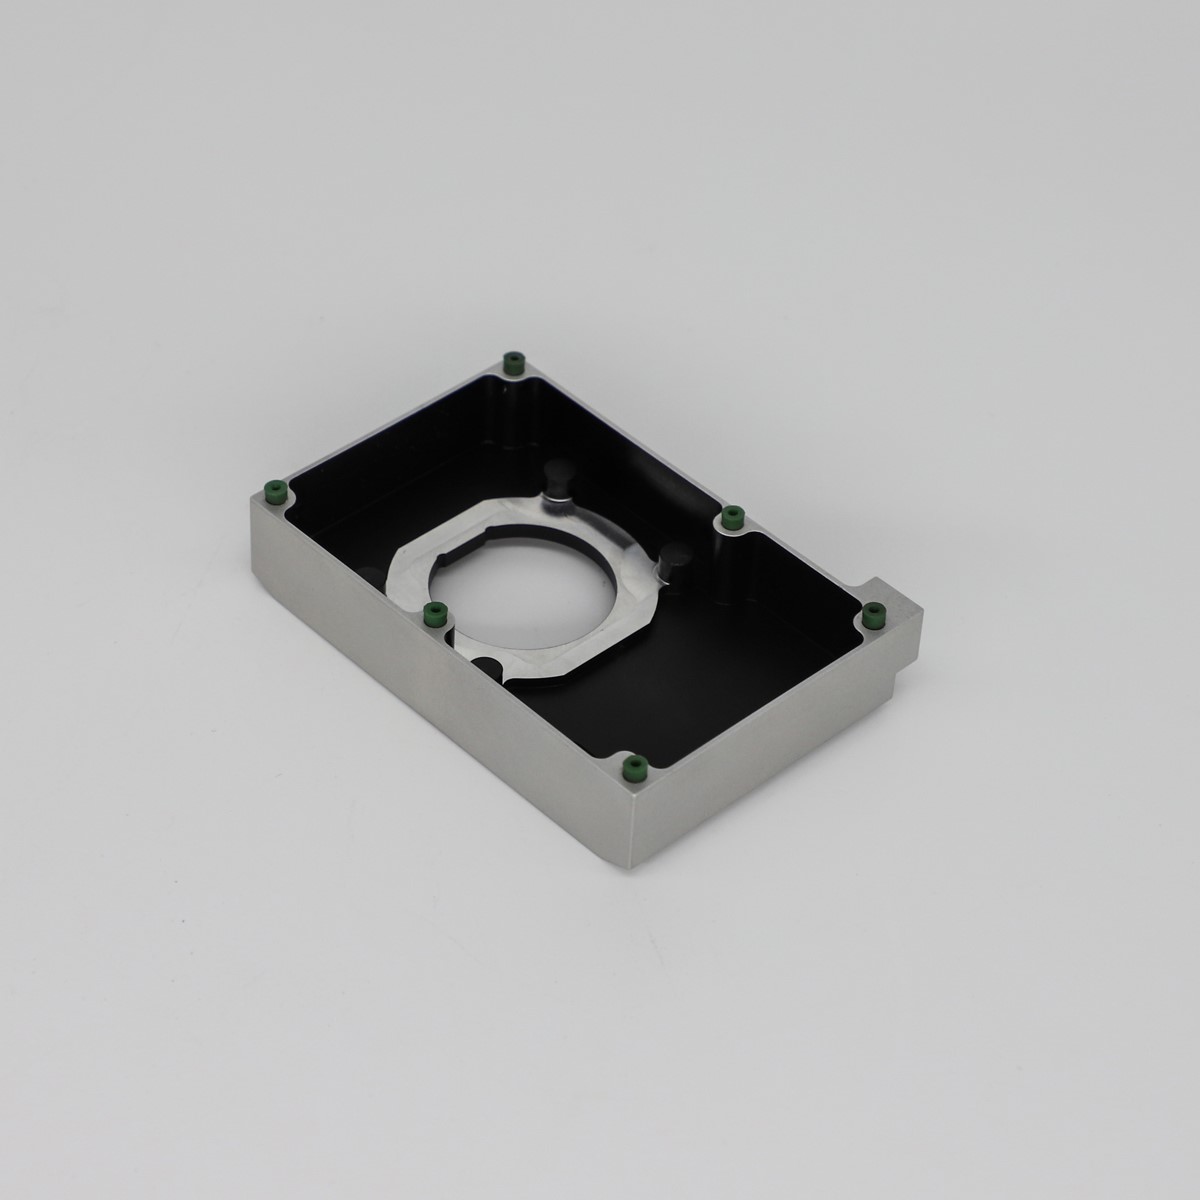 Xavier professional cnc camera housing parts excellent quality from top factory-4